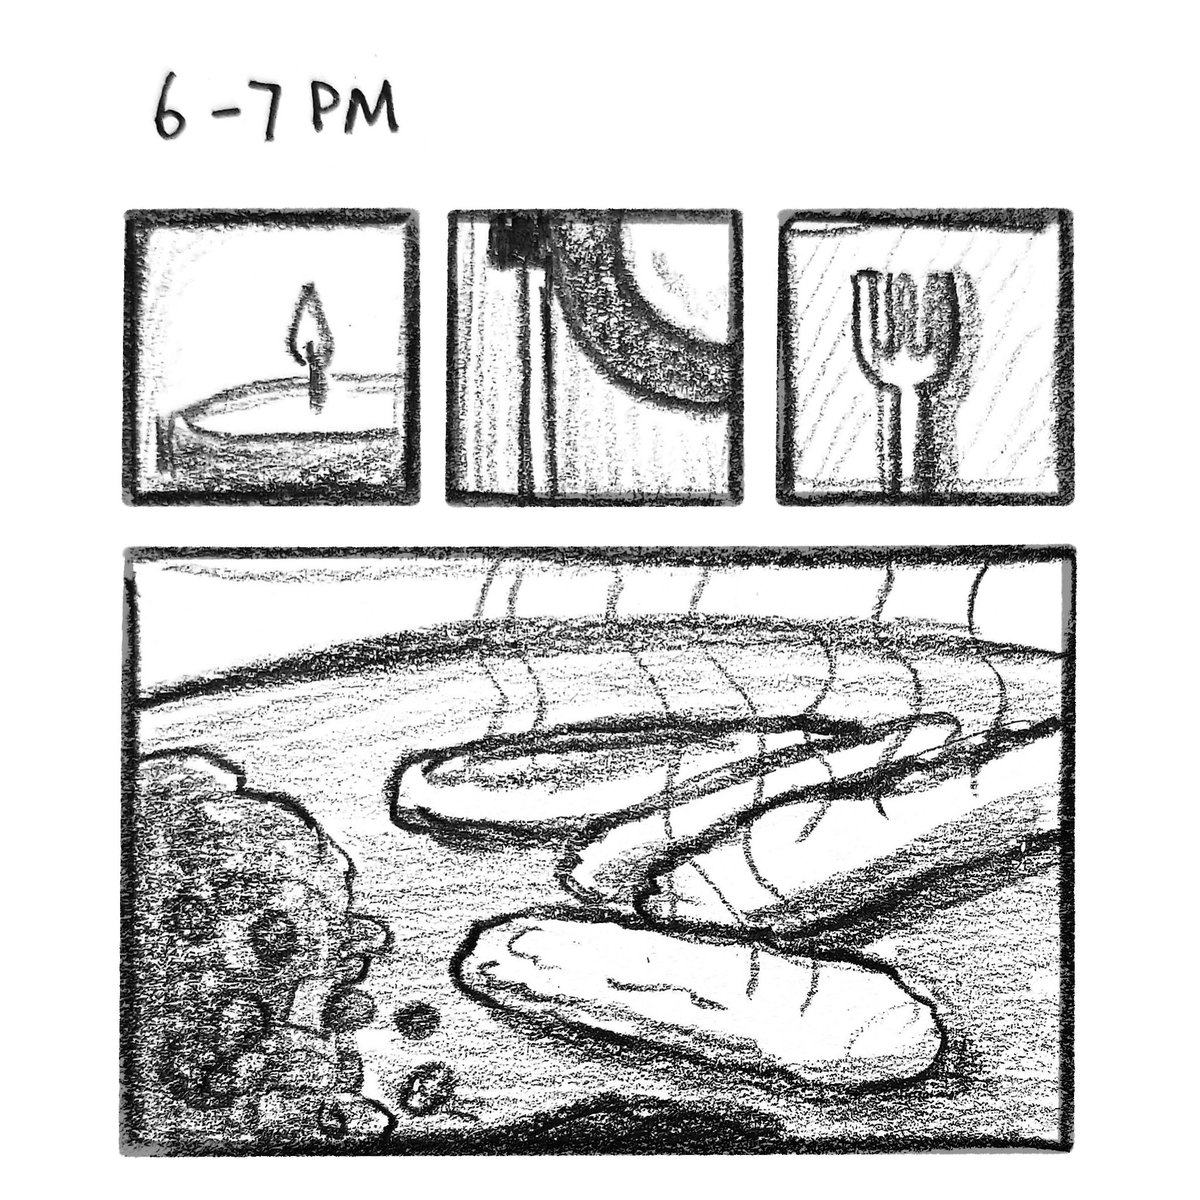 #hourlycomicday 6-7PM: fish stick dinner at my desk 